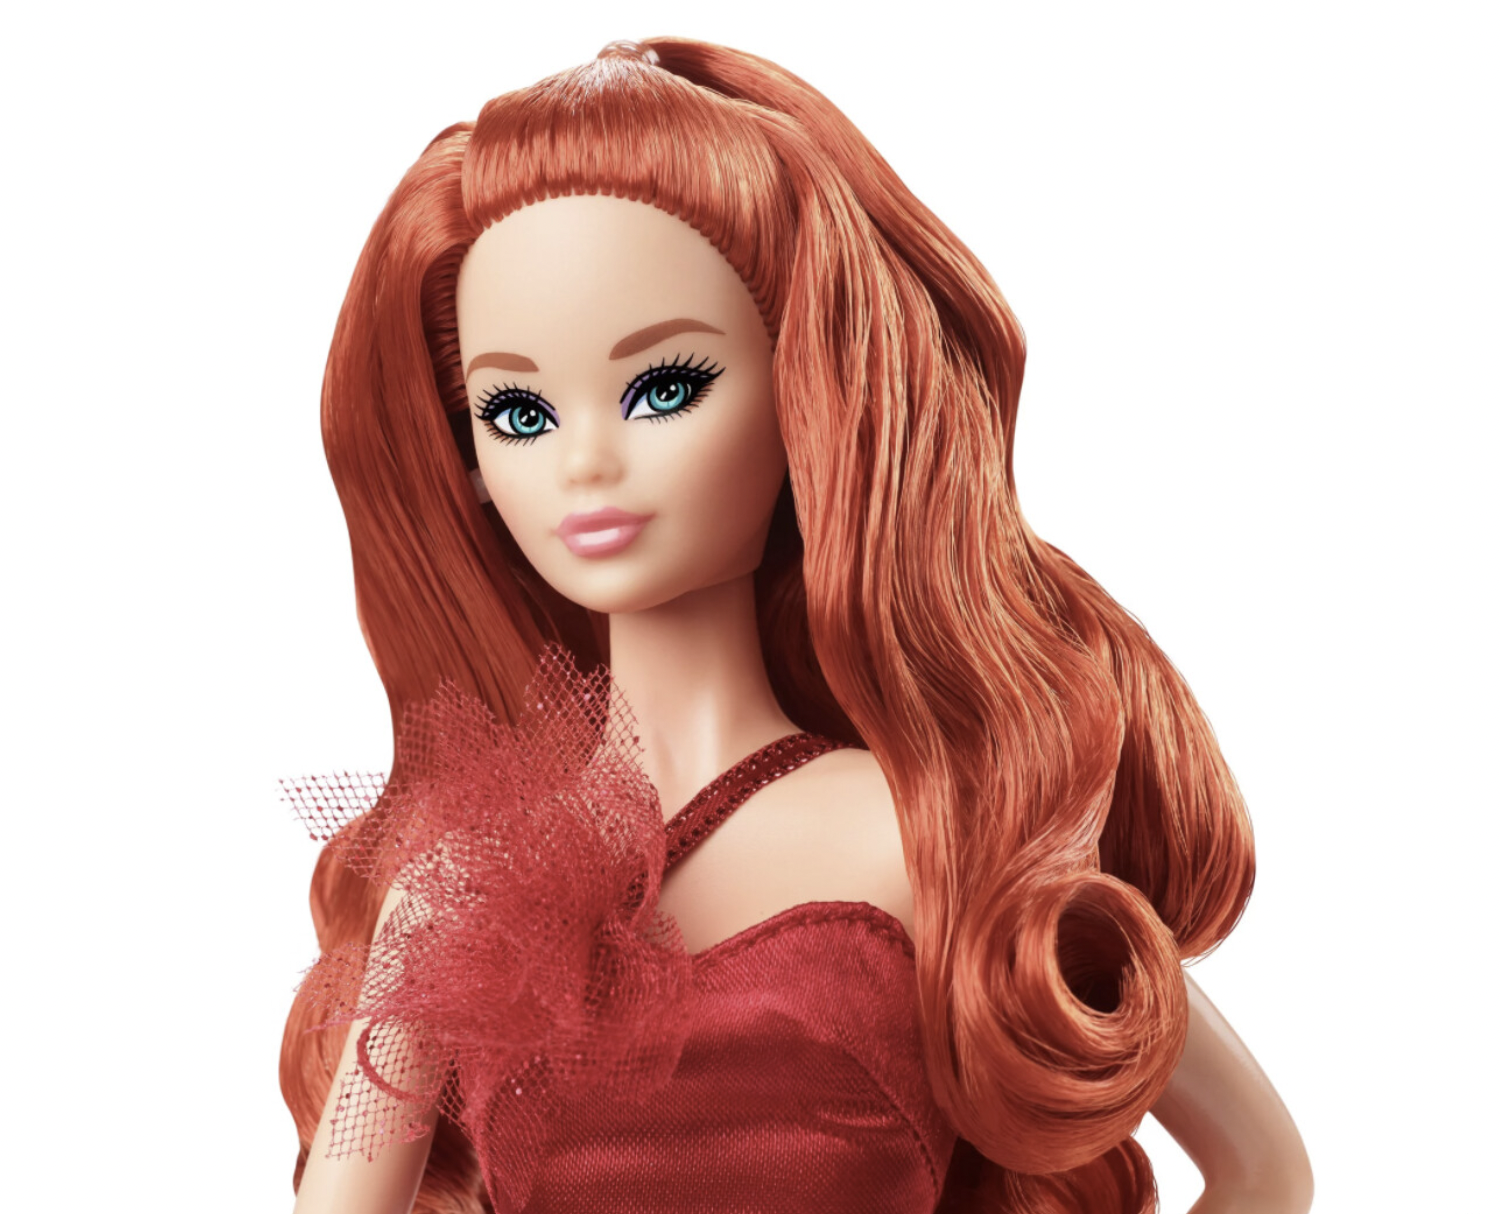 2022 Walmart Exclusive Holiday Barbie (Red Hair)